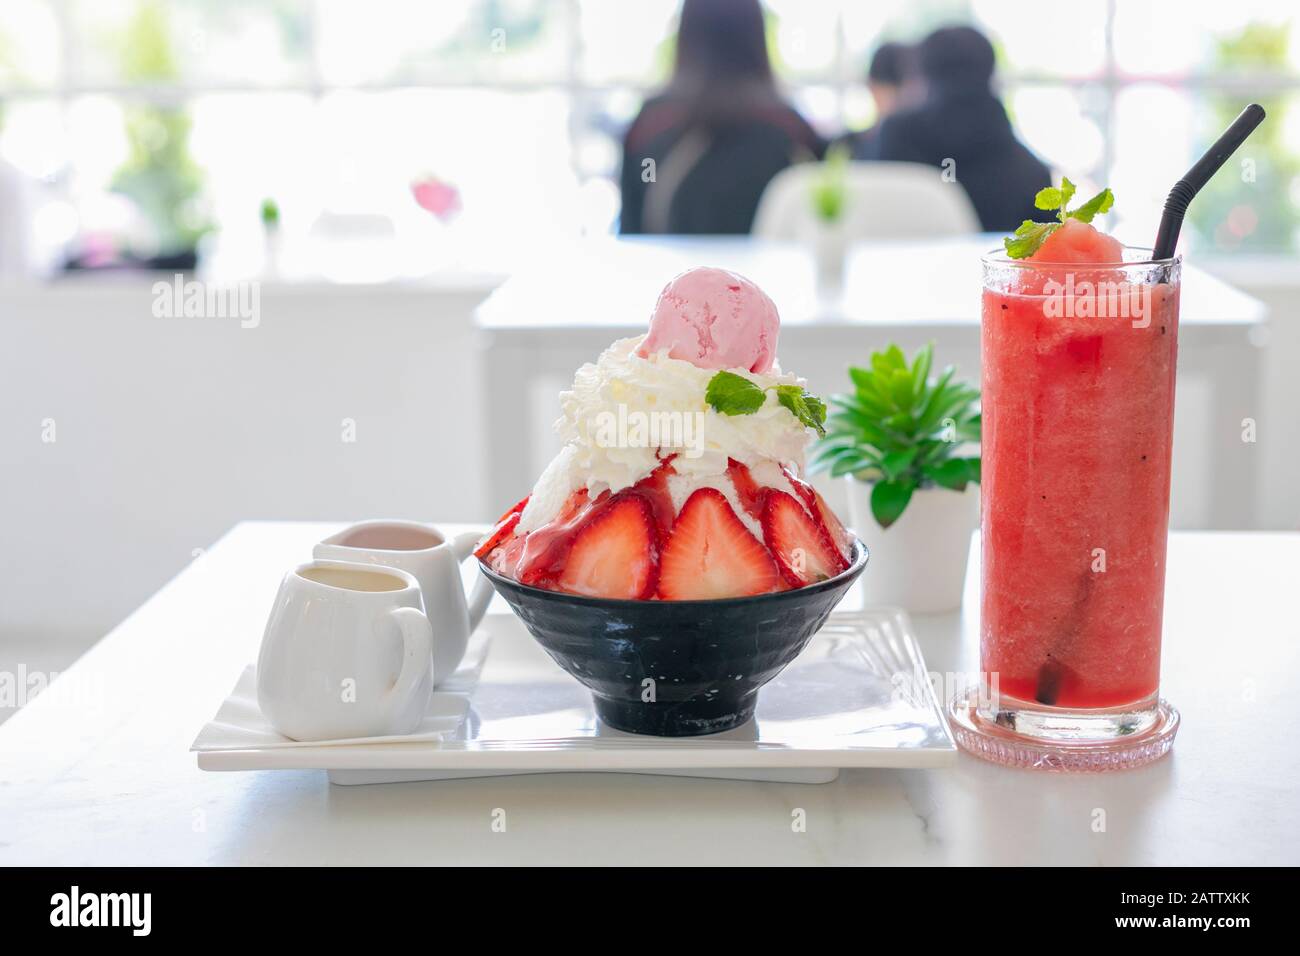 Delicious strawberry ice cream scoop with fresh strawberries on table background Stock Photo